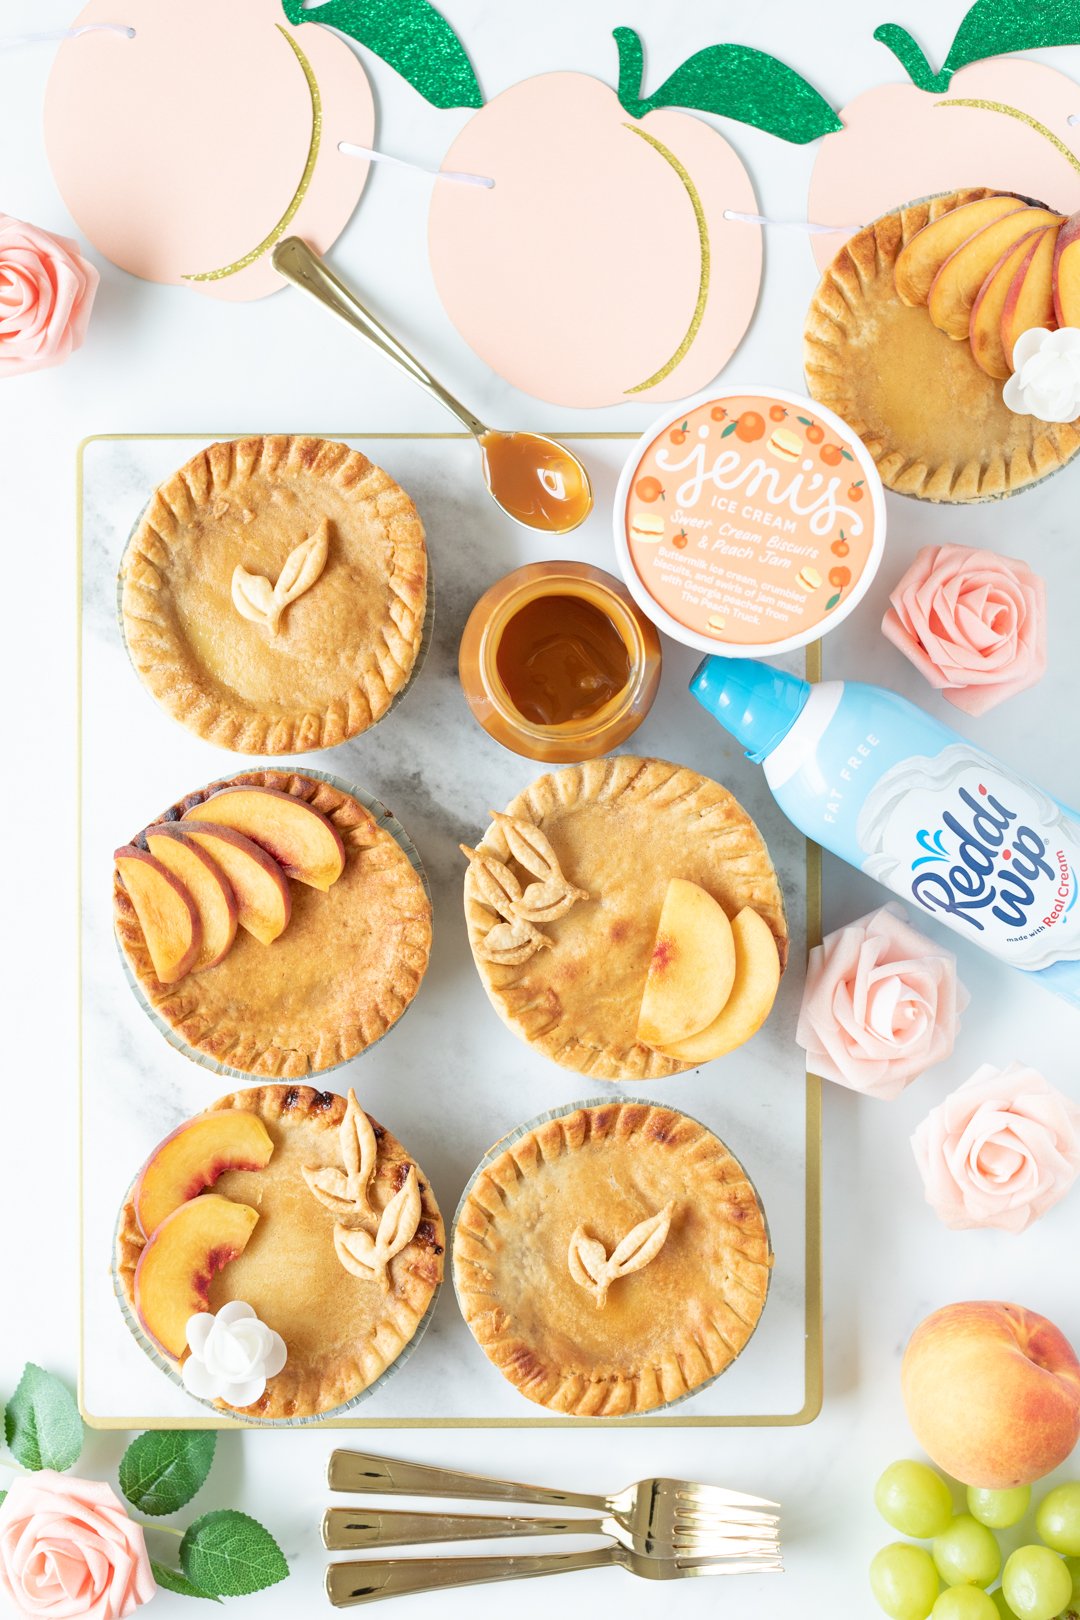 tray of mini peach pies with embellishments on top, spoonful of caramel, can of whipped cream, ice cream. Faux peach flowers for decoration and peach paper banner.